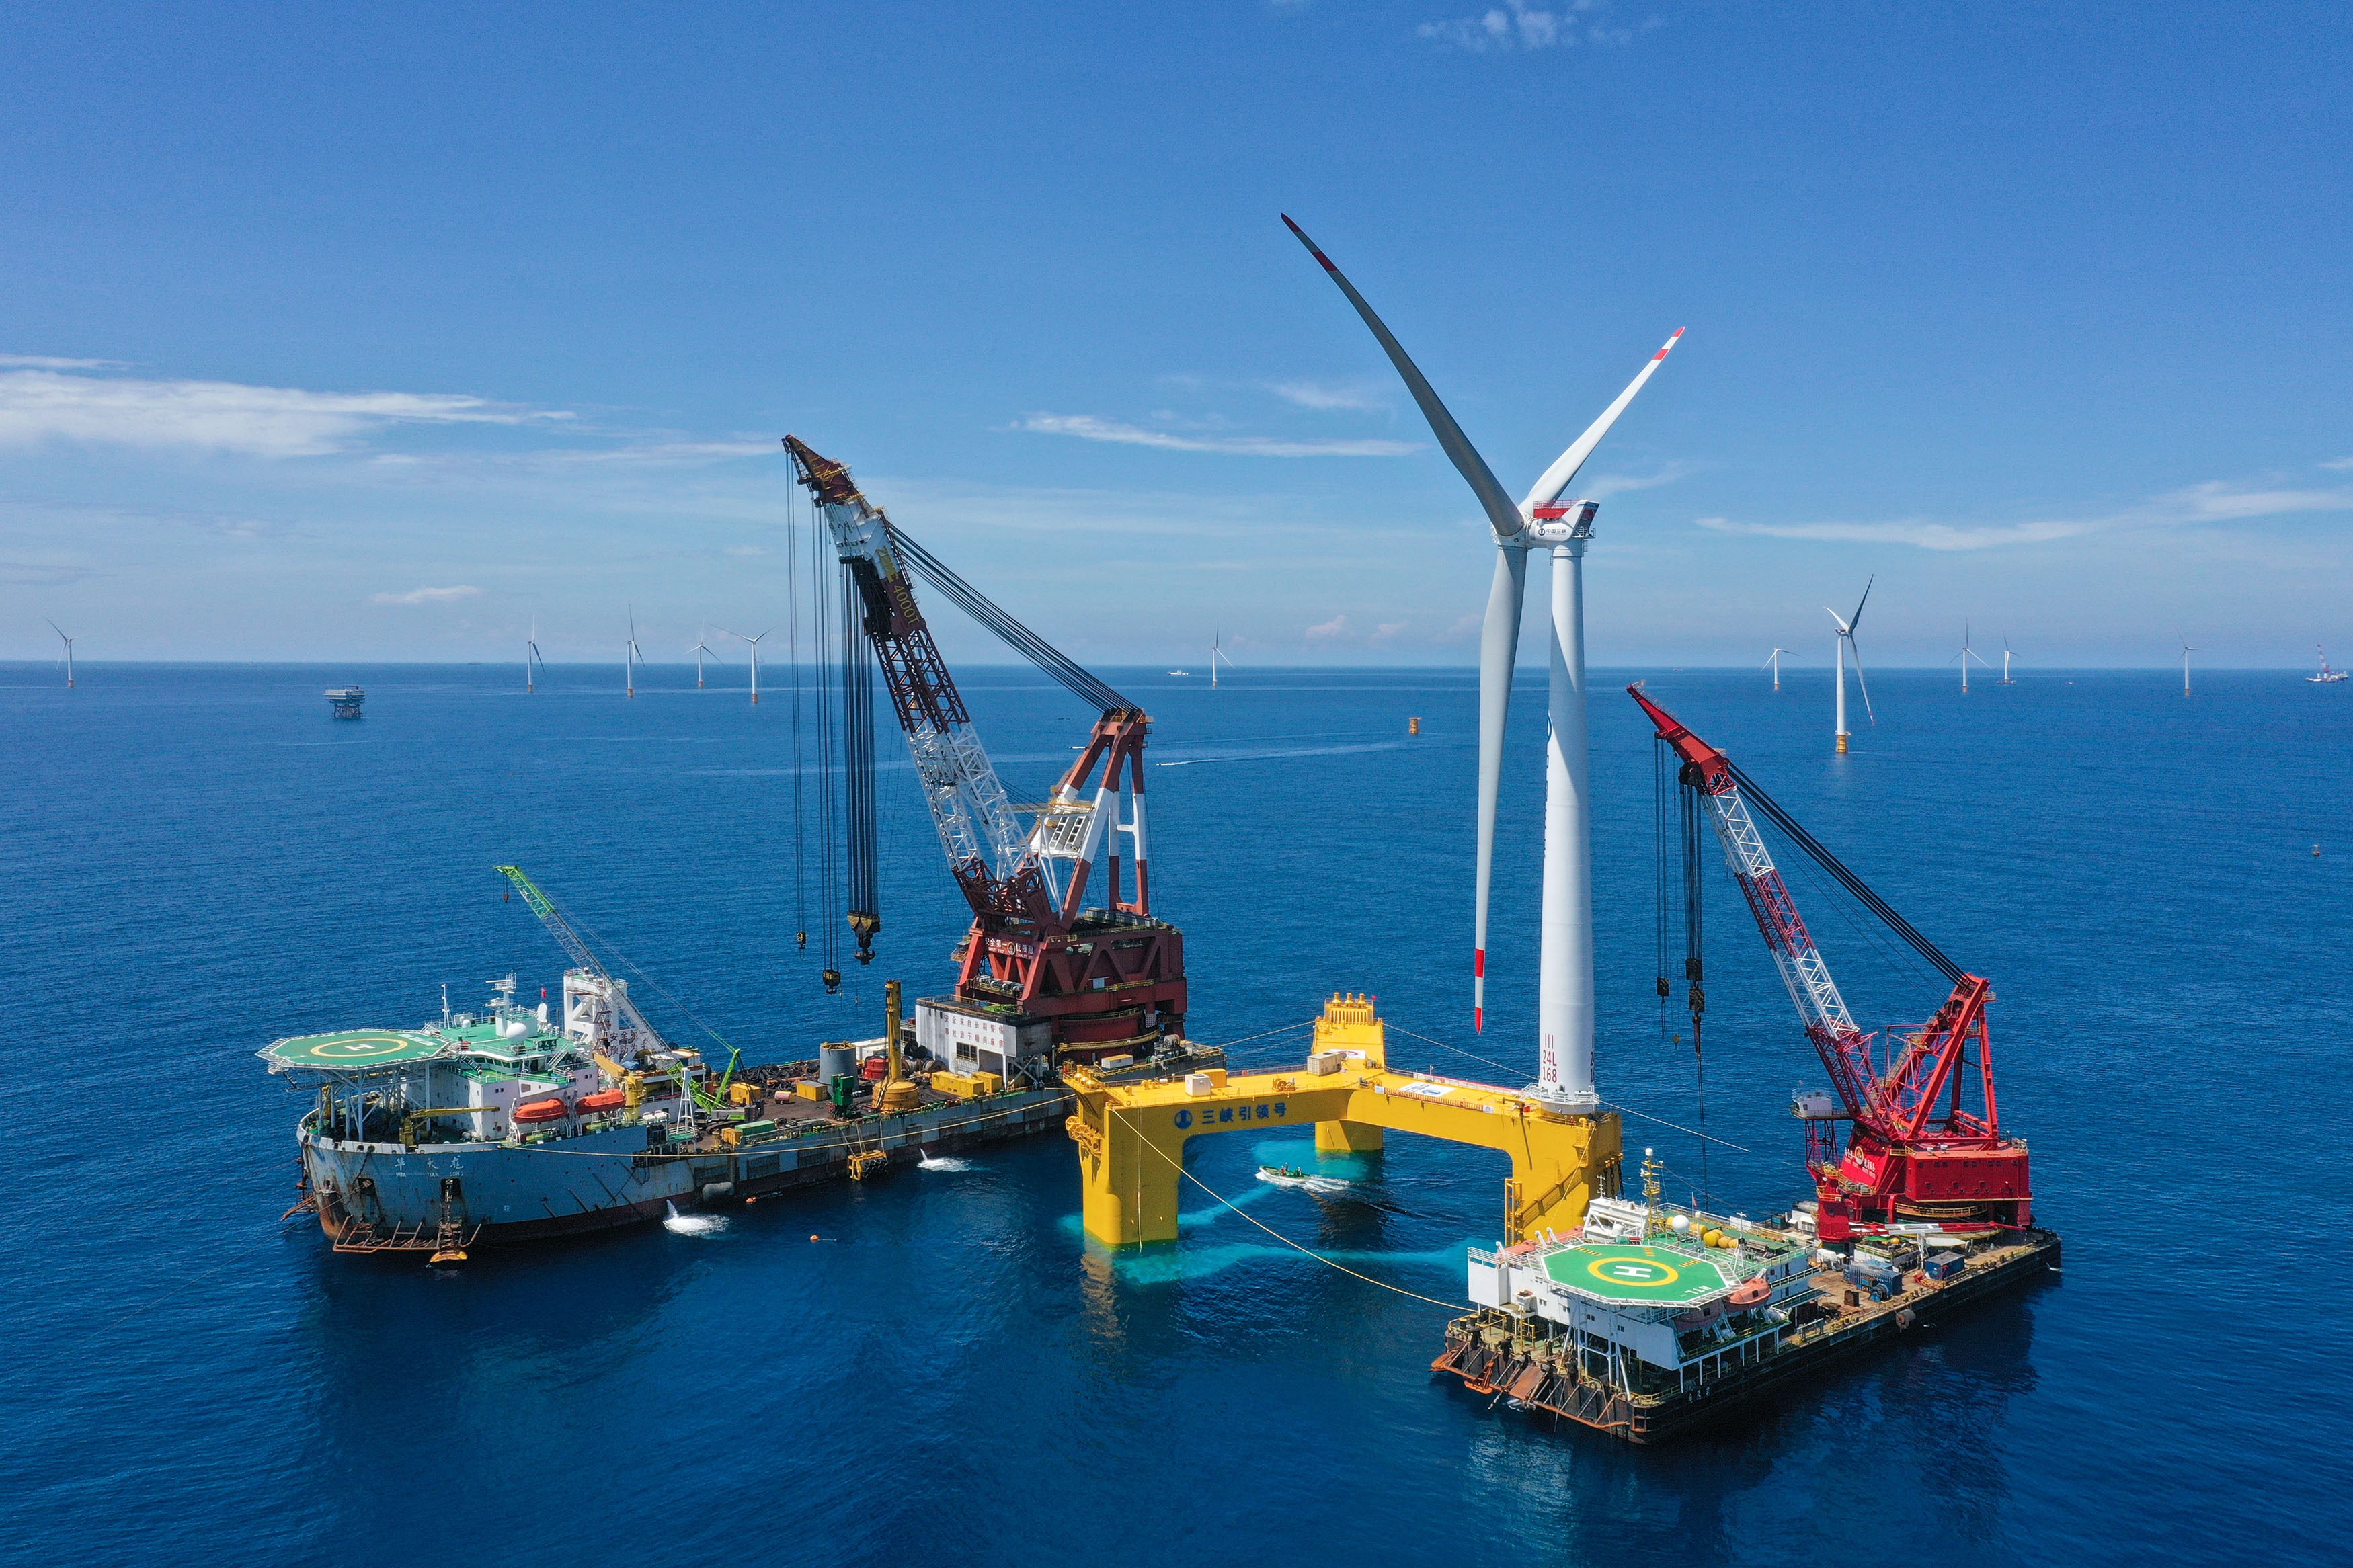 Ships assembling a floating offshore wind turbine